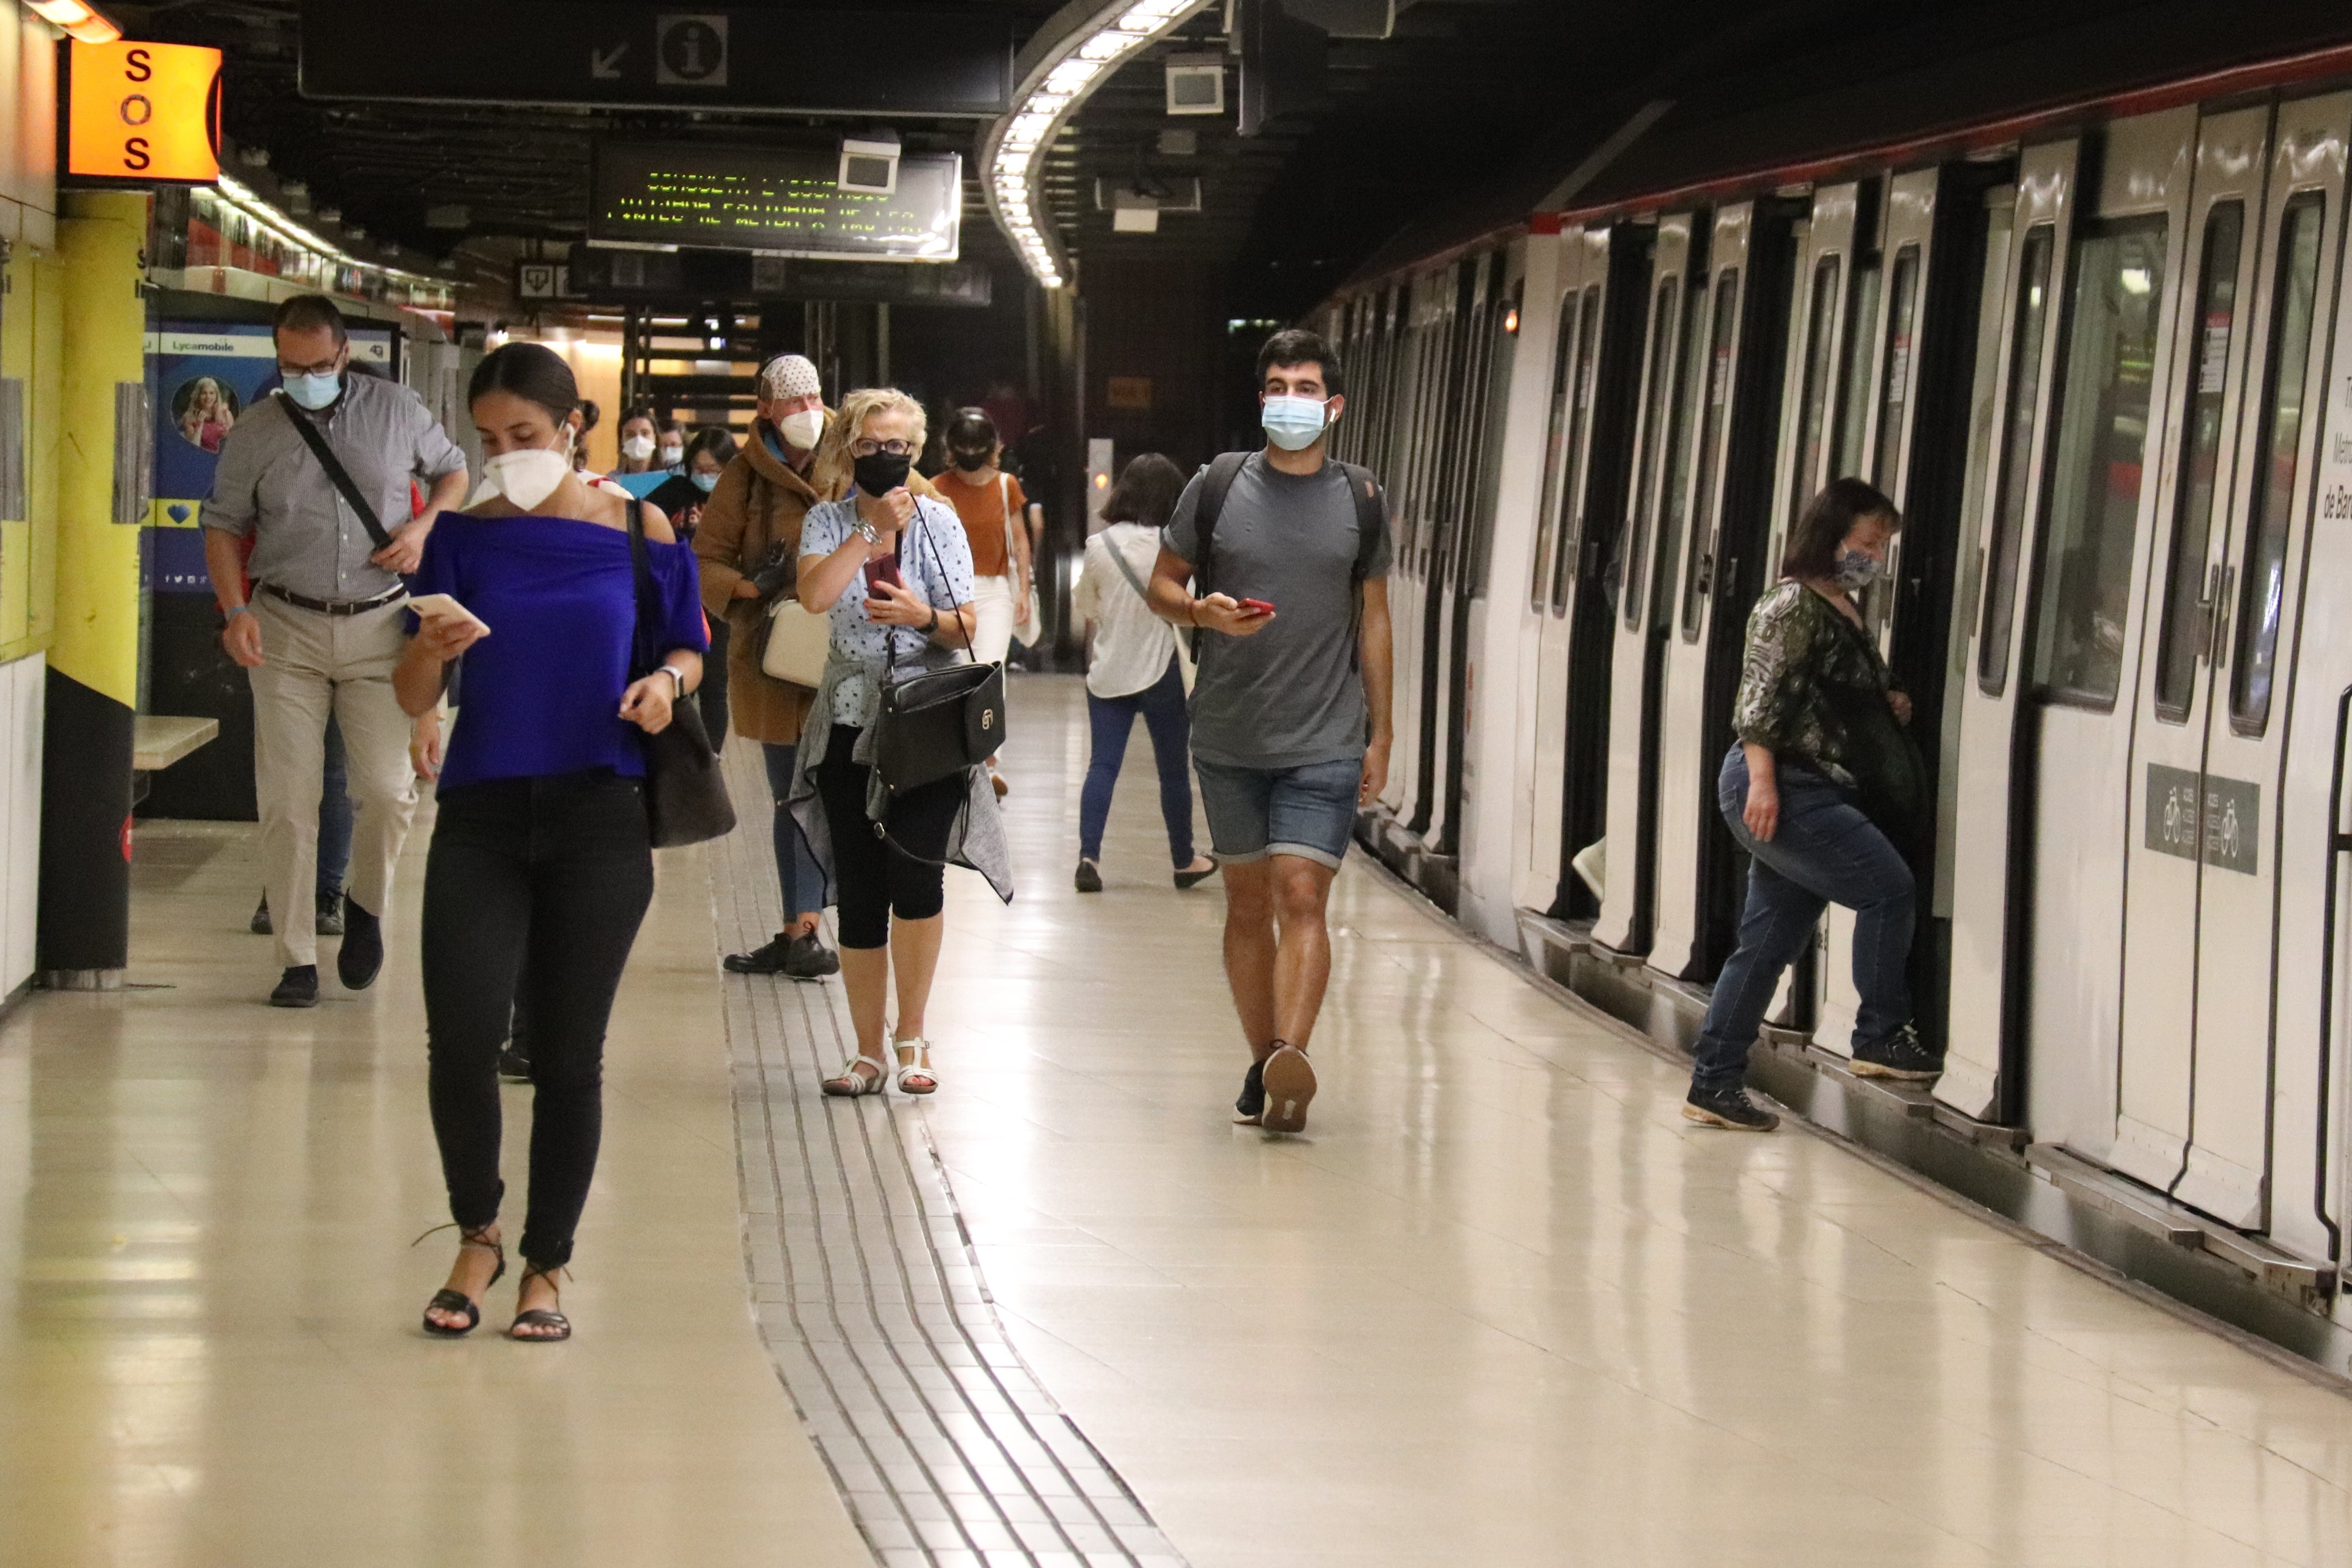 After February 7th, face masks will no longer be required on Spanish public transport